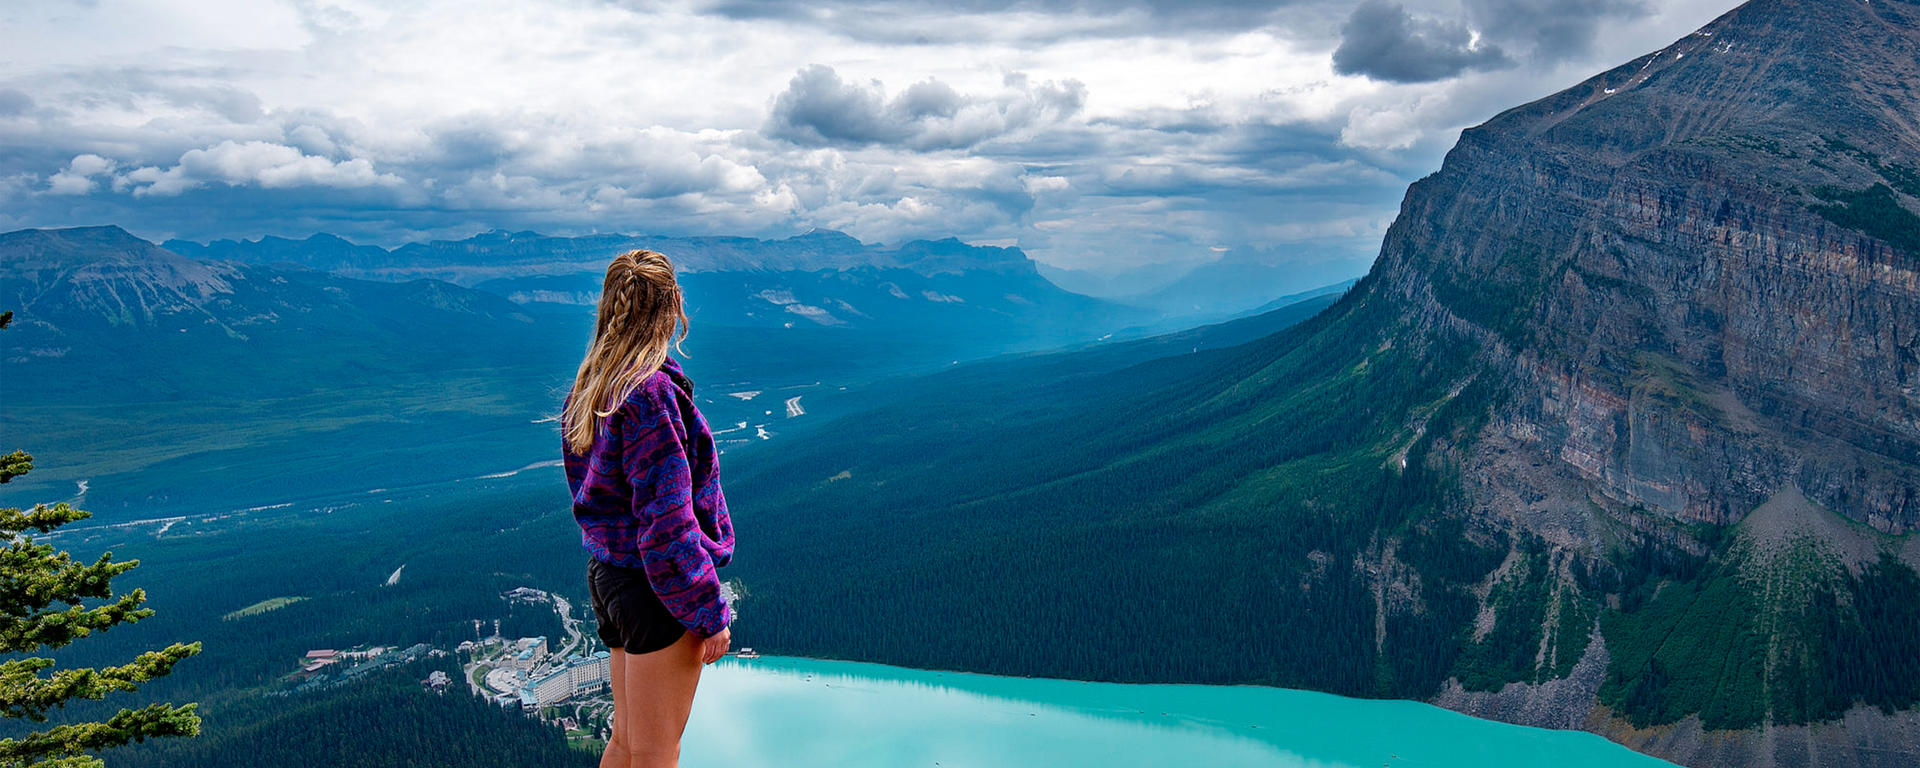 Person looking over Bow River basin near Lake Louise